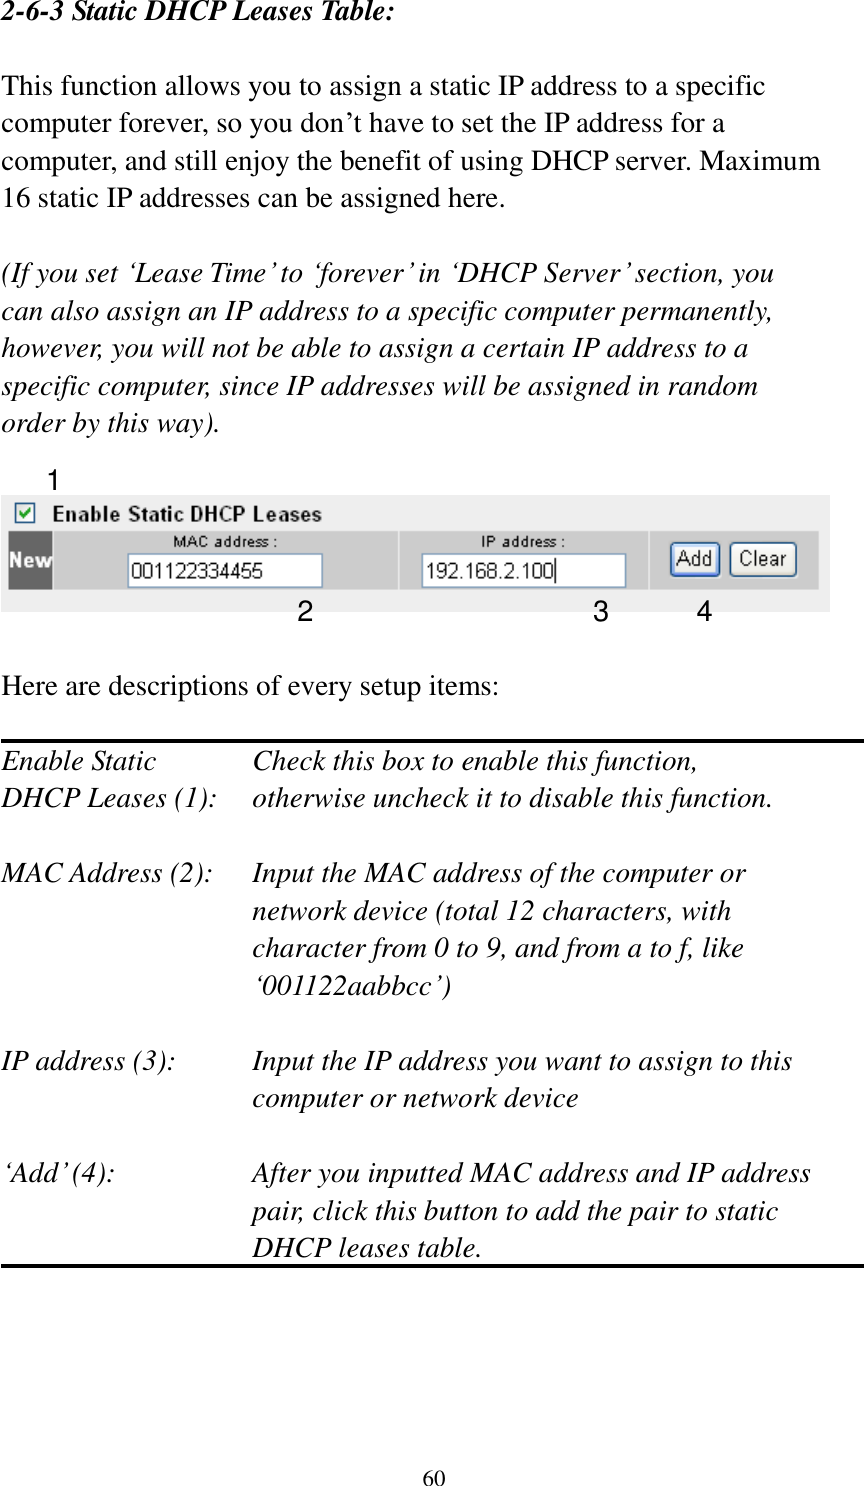 60 2-6-3 Static DHCP Leases Table:  This function allows you to assign a static IP address to a specific computer forever, so you don‟t have to set the IP address for a computer, and still enjoy the benefit of using DHCP server. Maximum 16 static IP addresses can be assigned here.  (If you set „Lease Time‟ to „forever‟ in „DHCP Server‟ section, you can also assign an IP address to a specific computer permanently, however, you will not be able to assign a certain IP address to a specific computer, since IP addresses will be assigned in random order by this way).      Here are descriptions of every setup items:  Enable Static      Check this box to enable this function, DHCP Leases (1):    otherwise uncheck it to disable this function.  MAC Address (2):    Input the MAC address of the computer or network device (total 12 characters, with character from 0 to 9, and from a to f, like „001122aabbcc‟)    IP address (3):    Input the IP address you want to assign to this computer or network device    „Add‟ (4):    After you inputted MAC address and IP address pair, click this button to add the pair to static DHCP leases table.     1 2 3 4 